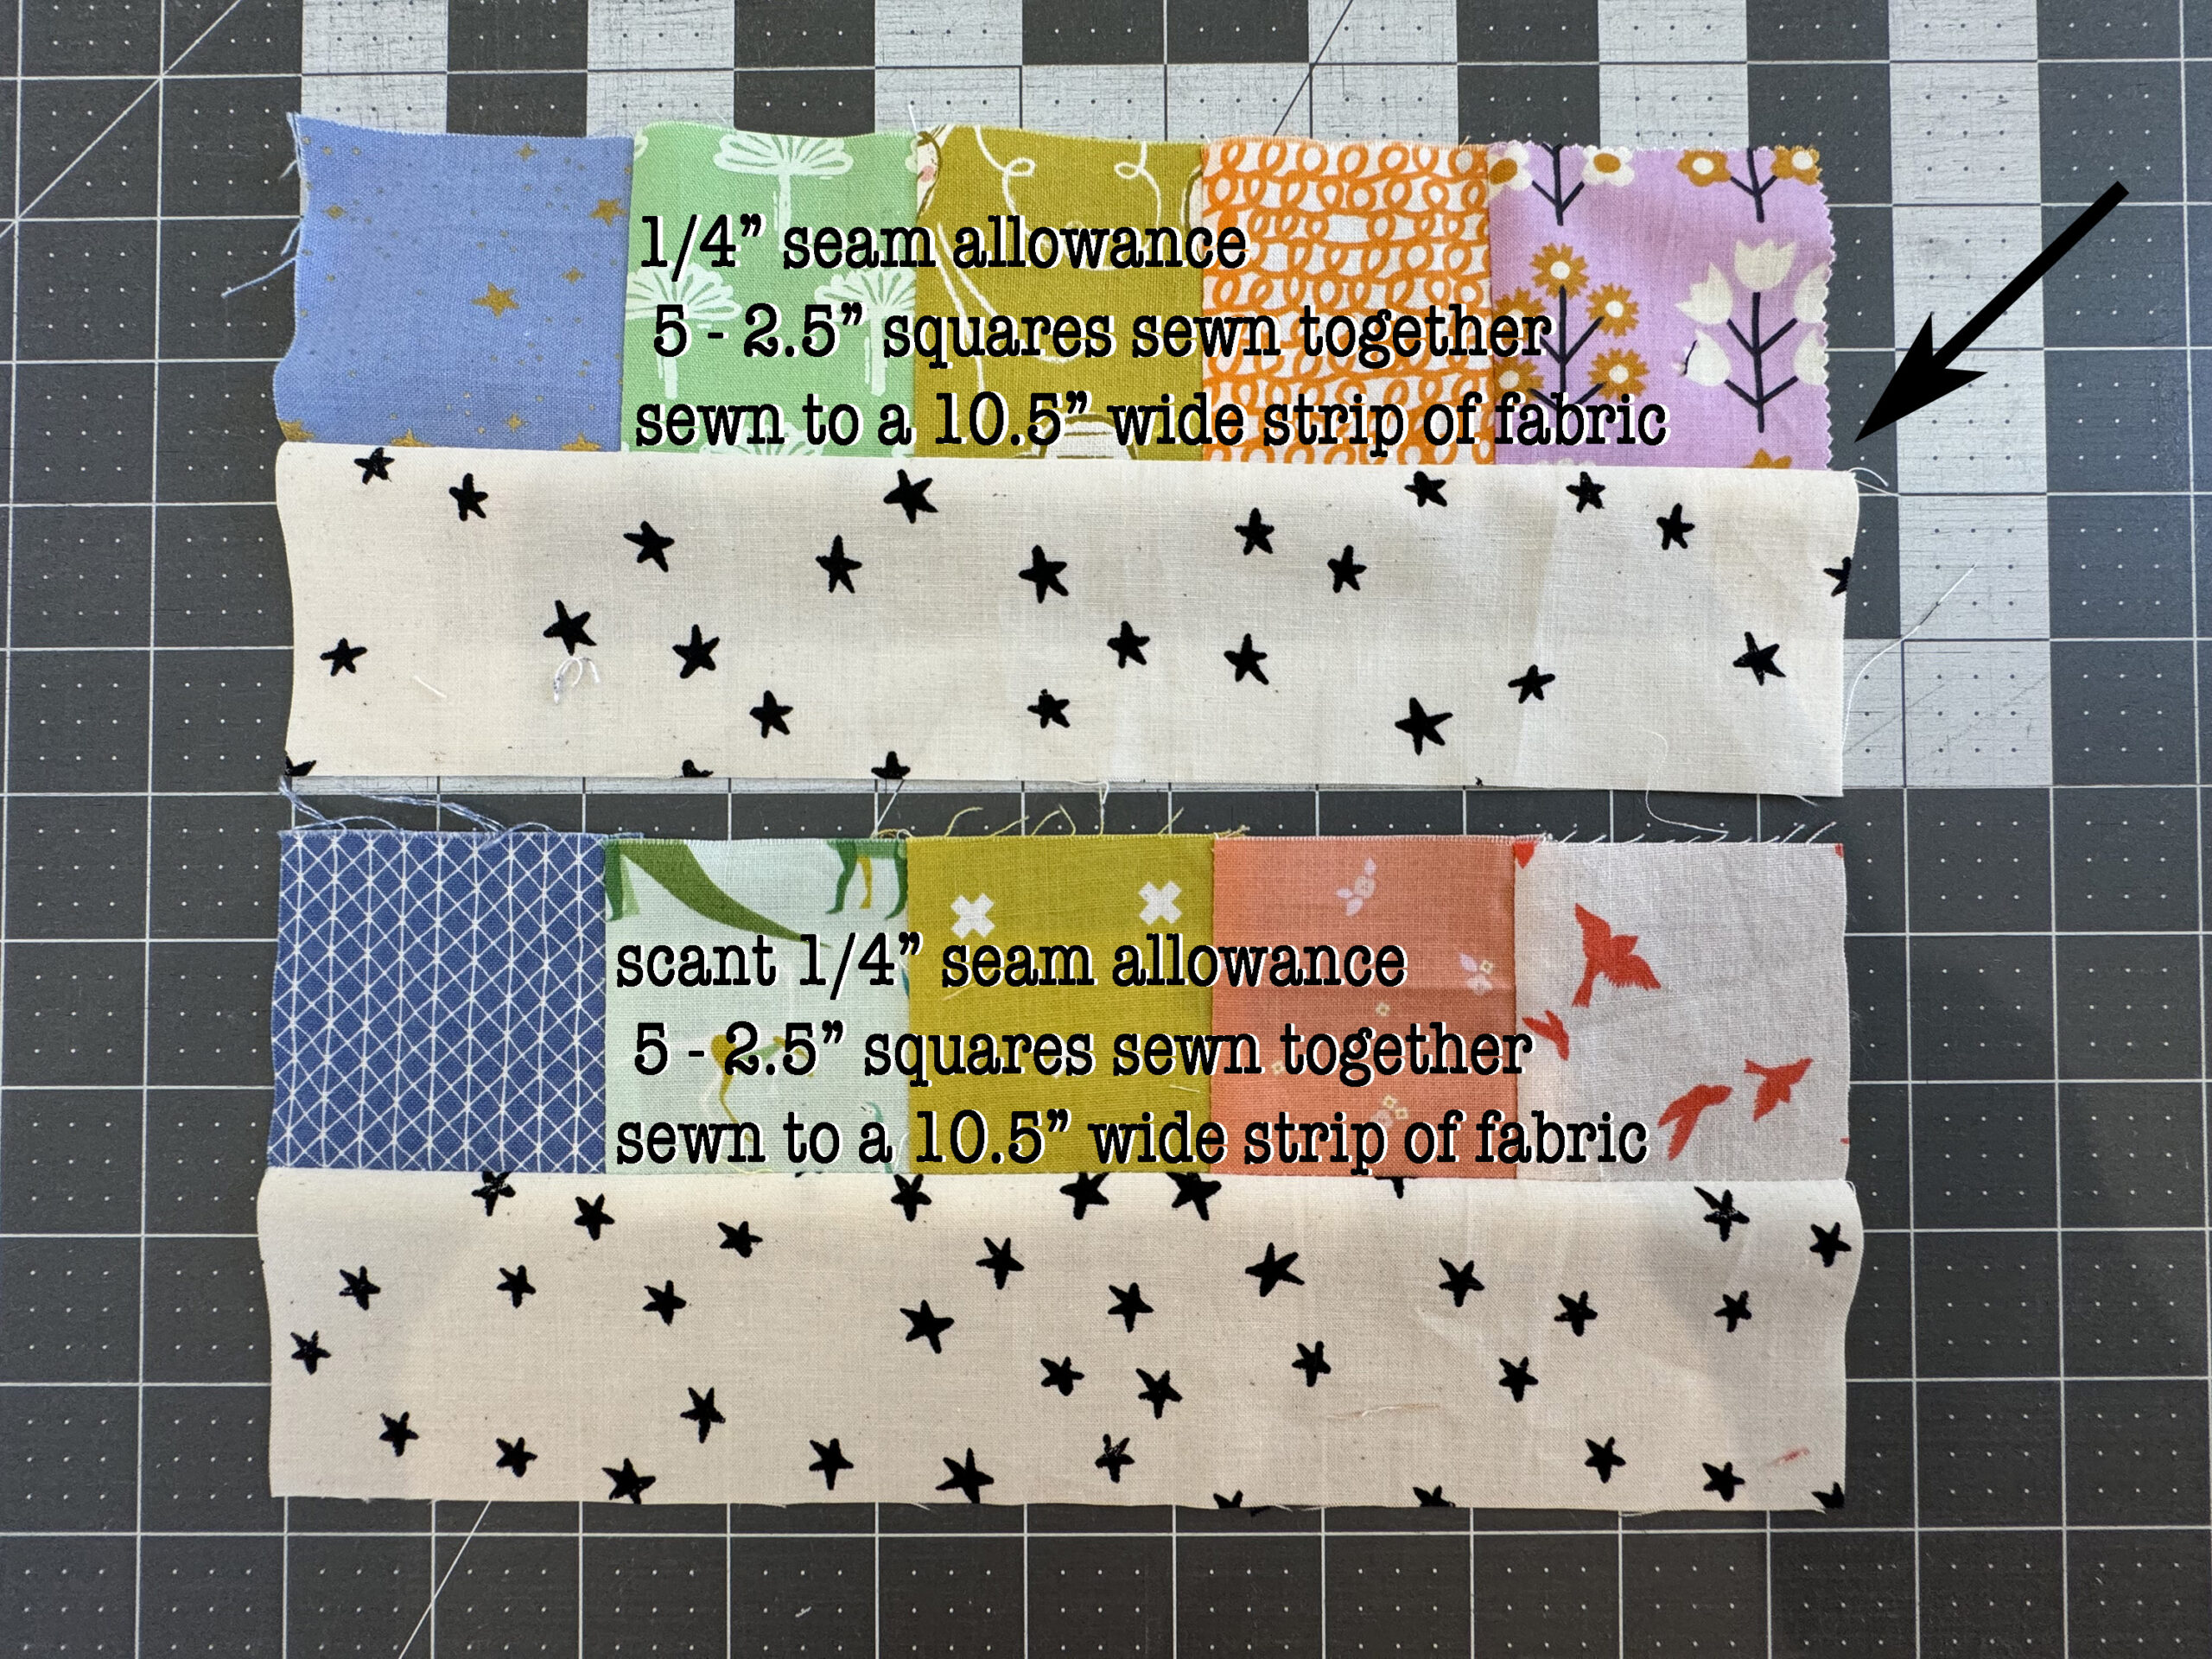 Woollypetals Scant 1/4" seam allowance image. 2 sets of 5 squares sewn to strips